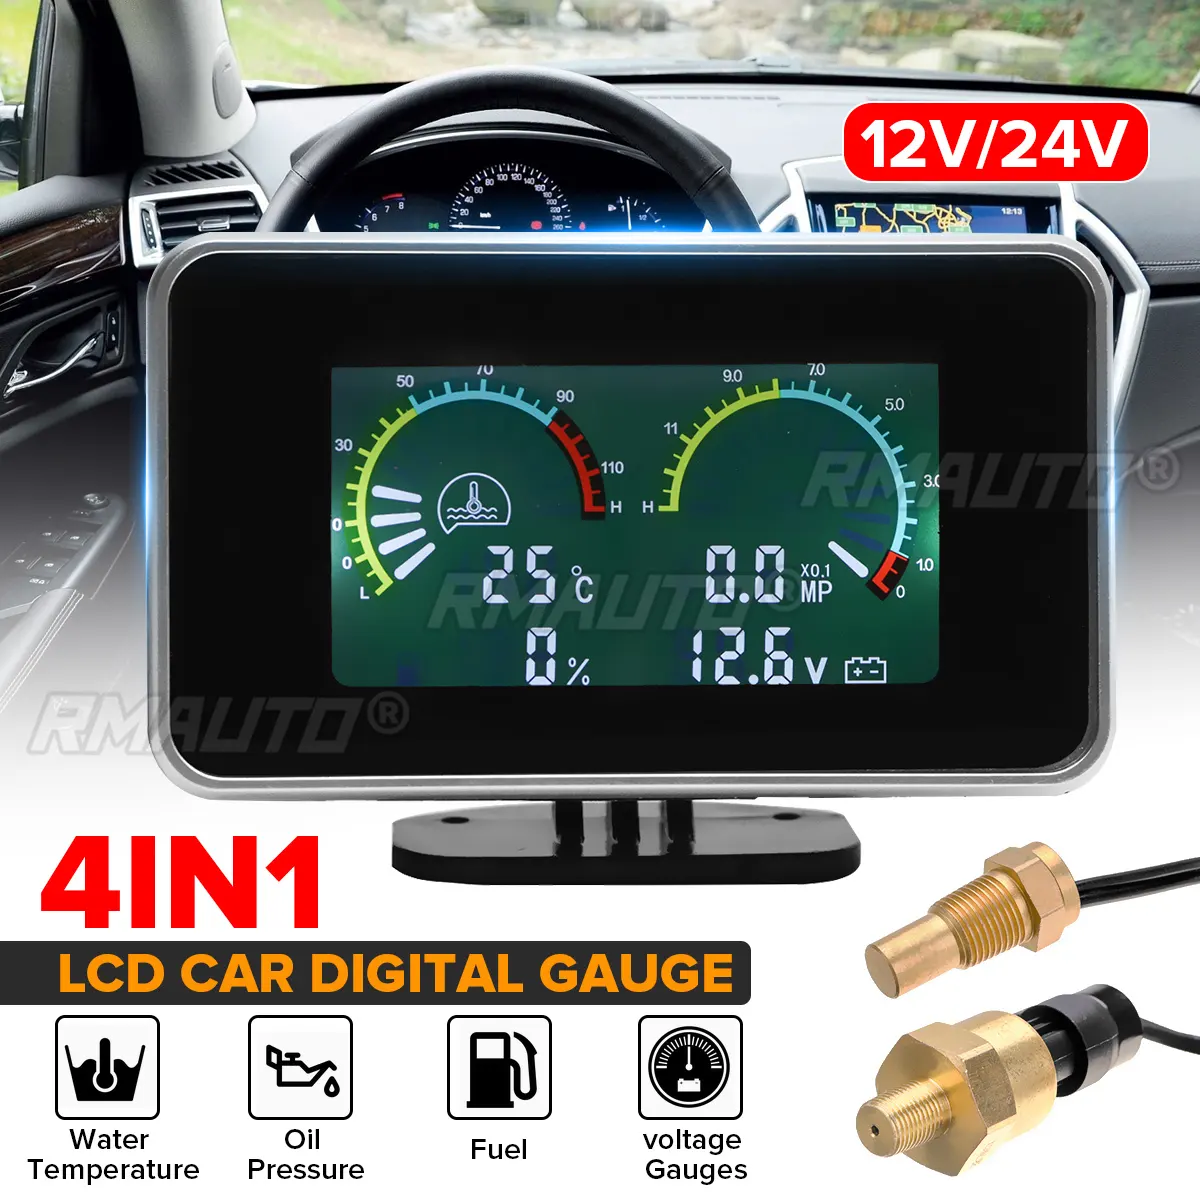 4in1 LCD Car Digital Gauge Oil Voltage Pressure Fuel Water Temp Meter M10 Auto Replacement Parts 12V 24V